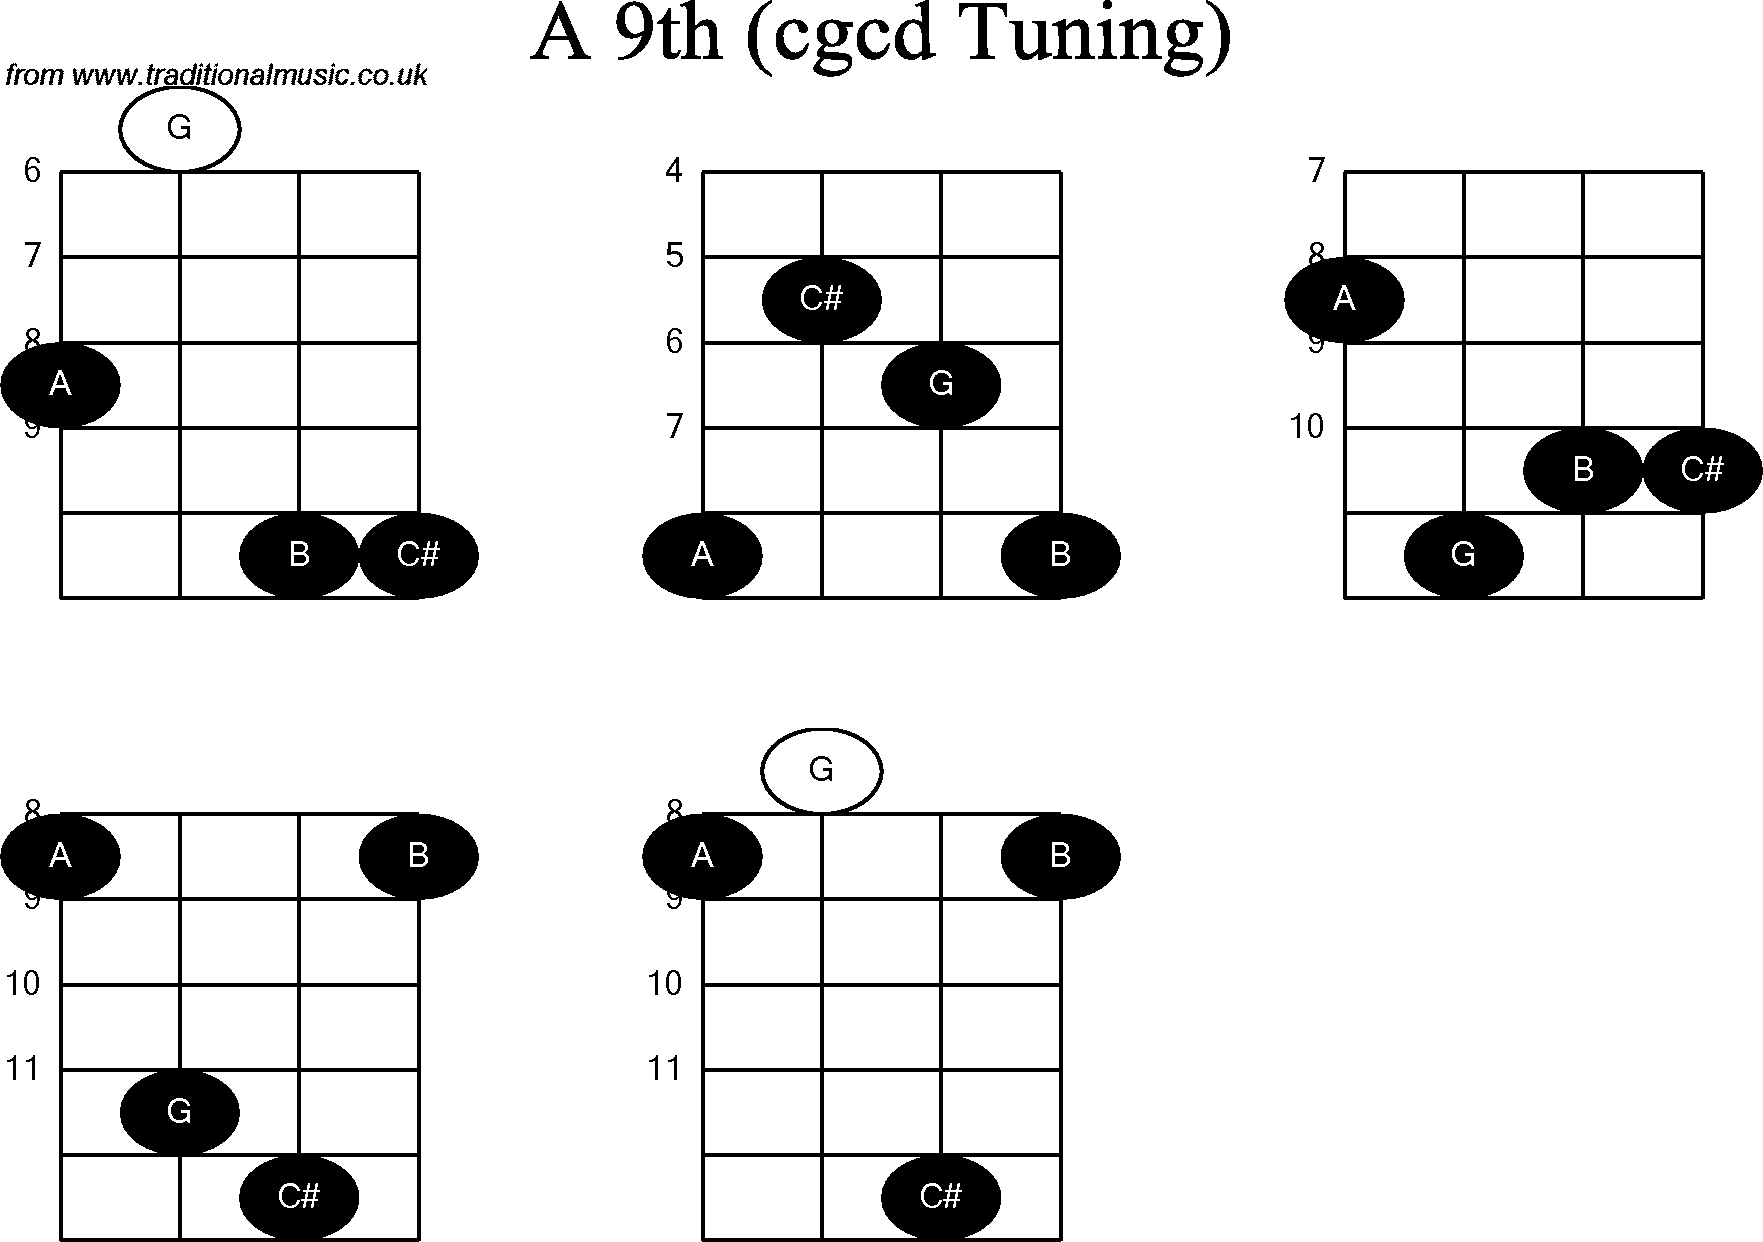 Chord diagrams for Banjo(Double C) A9th